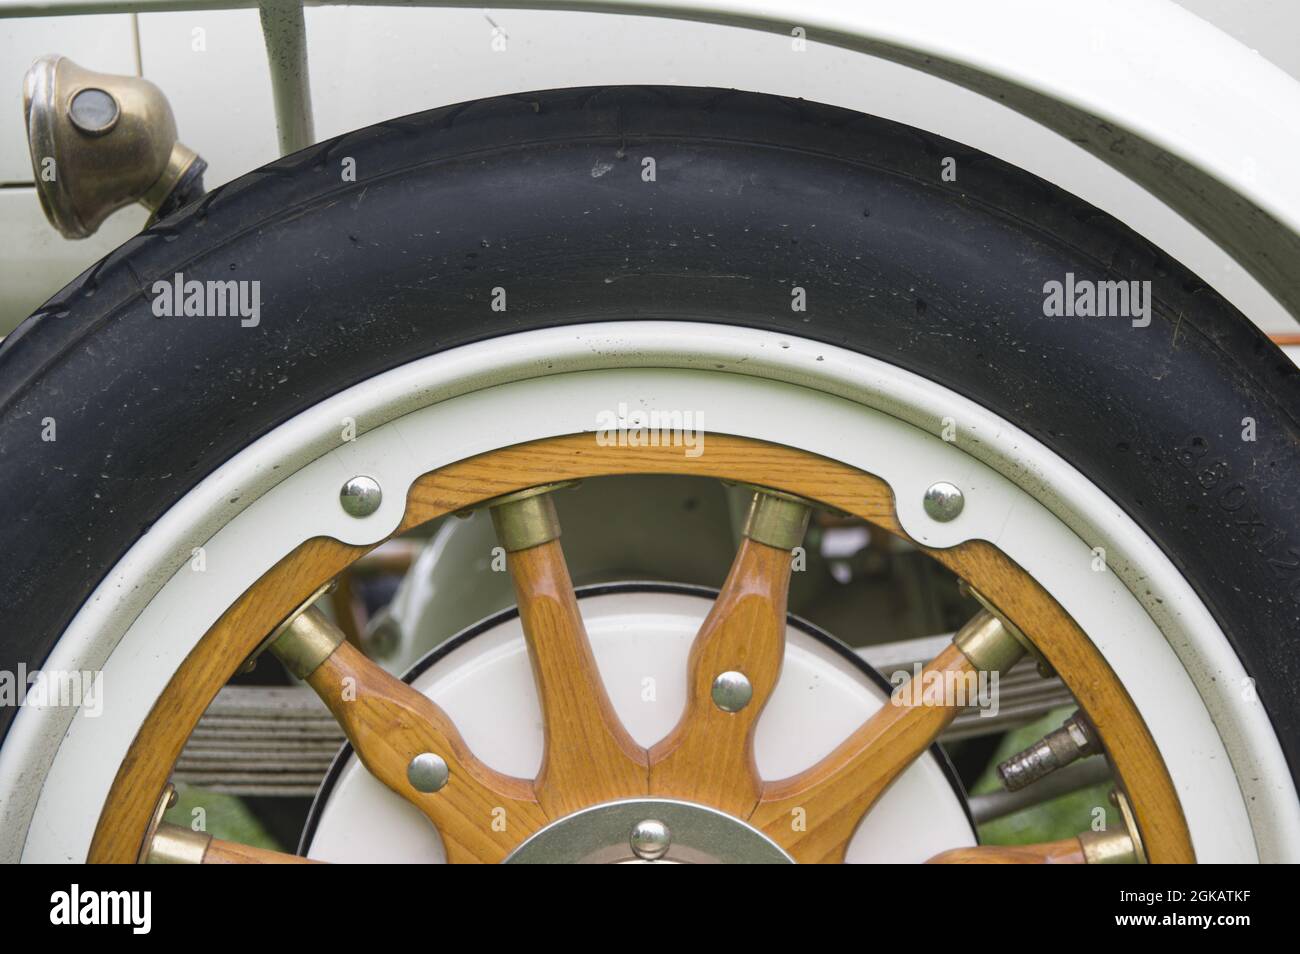 Close-up of tire and elegant refined wheel made of wooden and steel in white colour. Part of white gold antique retro vintage classic sport renovated car 1914 on exhibition Stock Photo